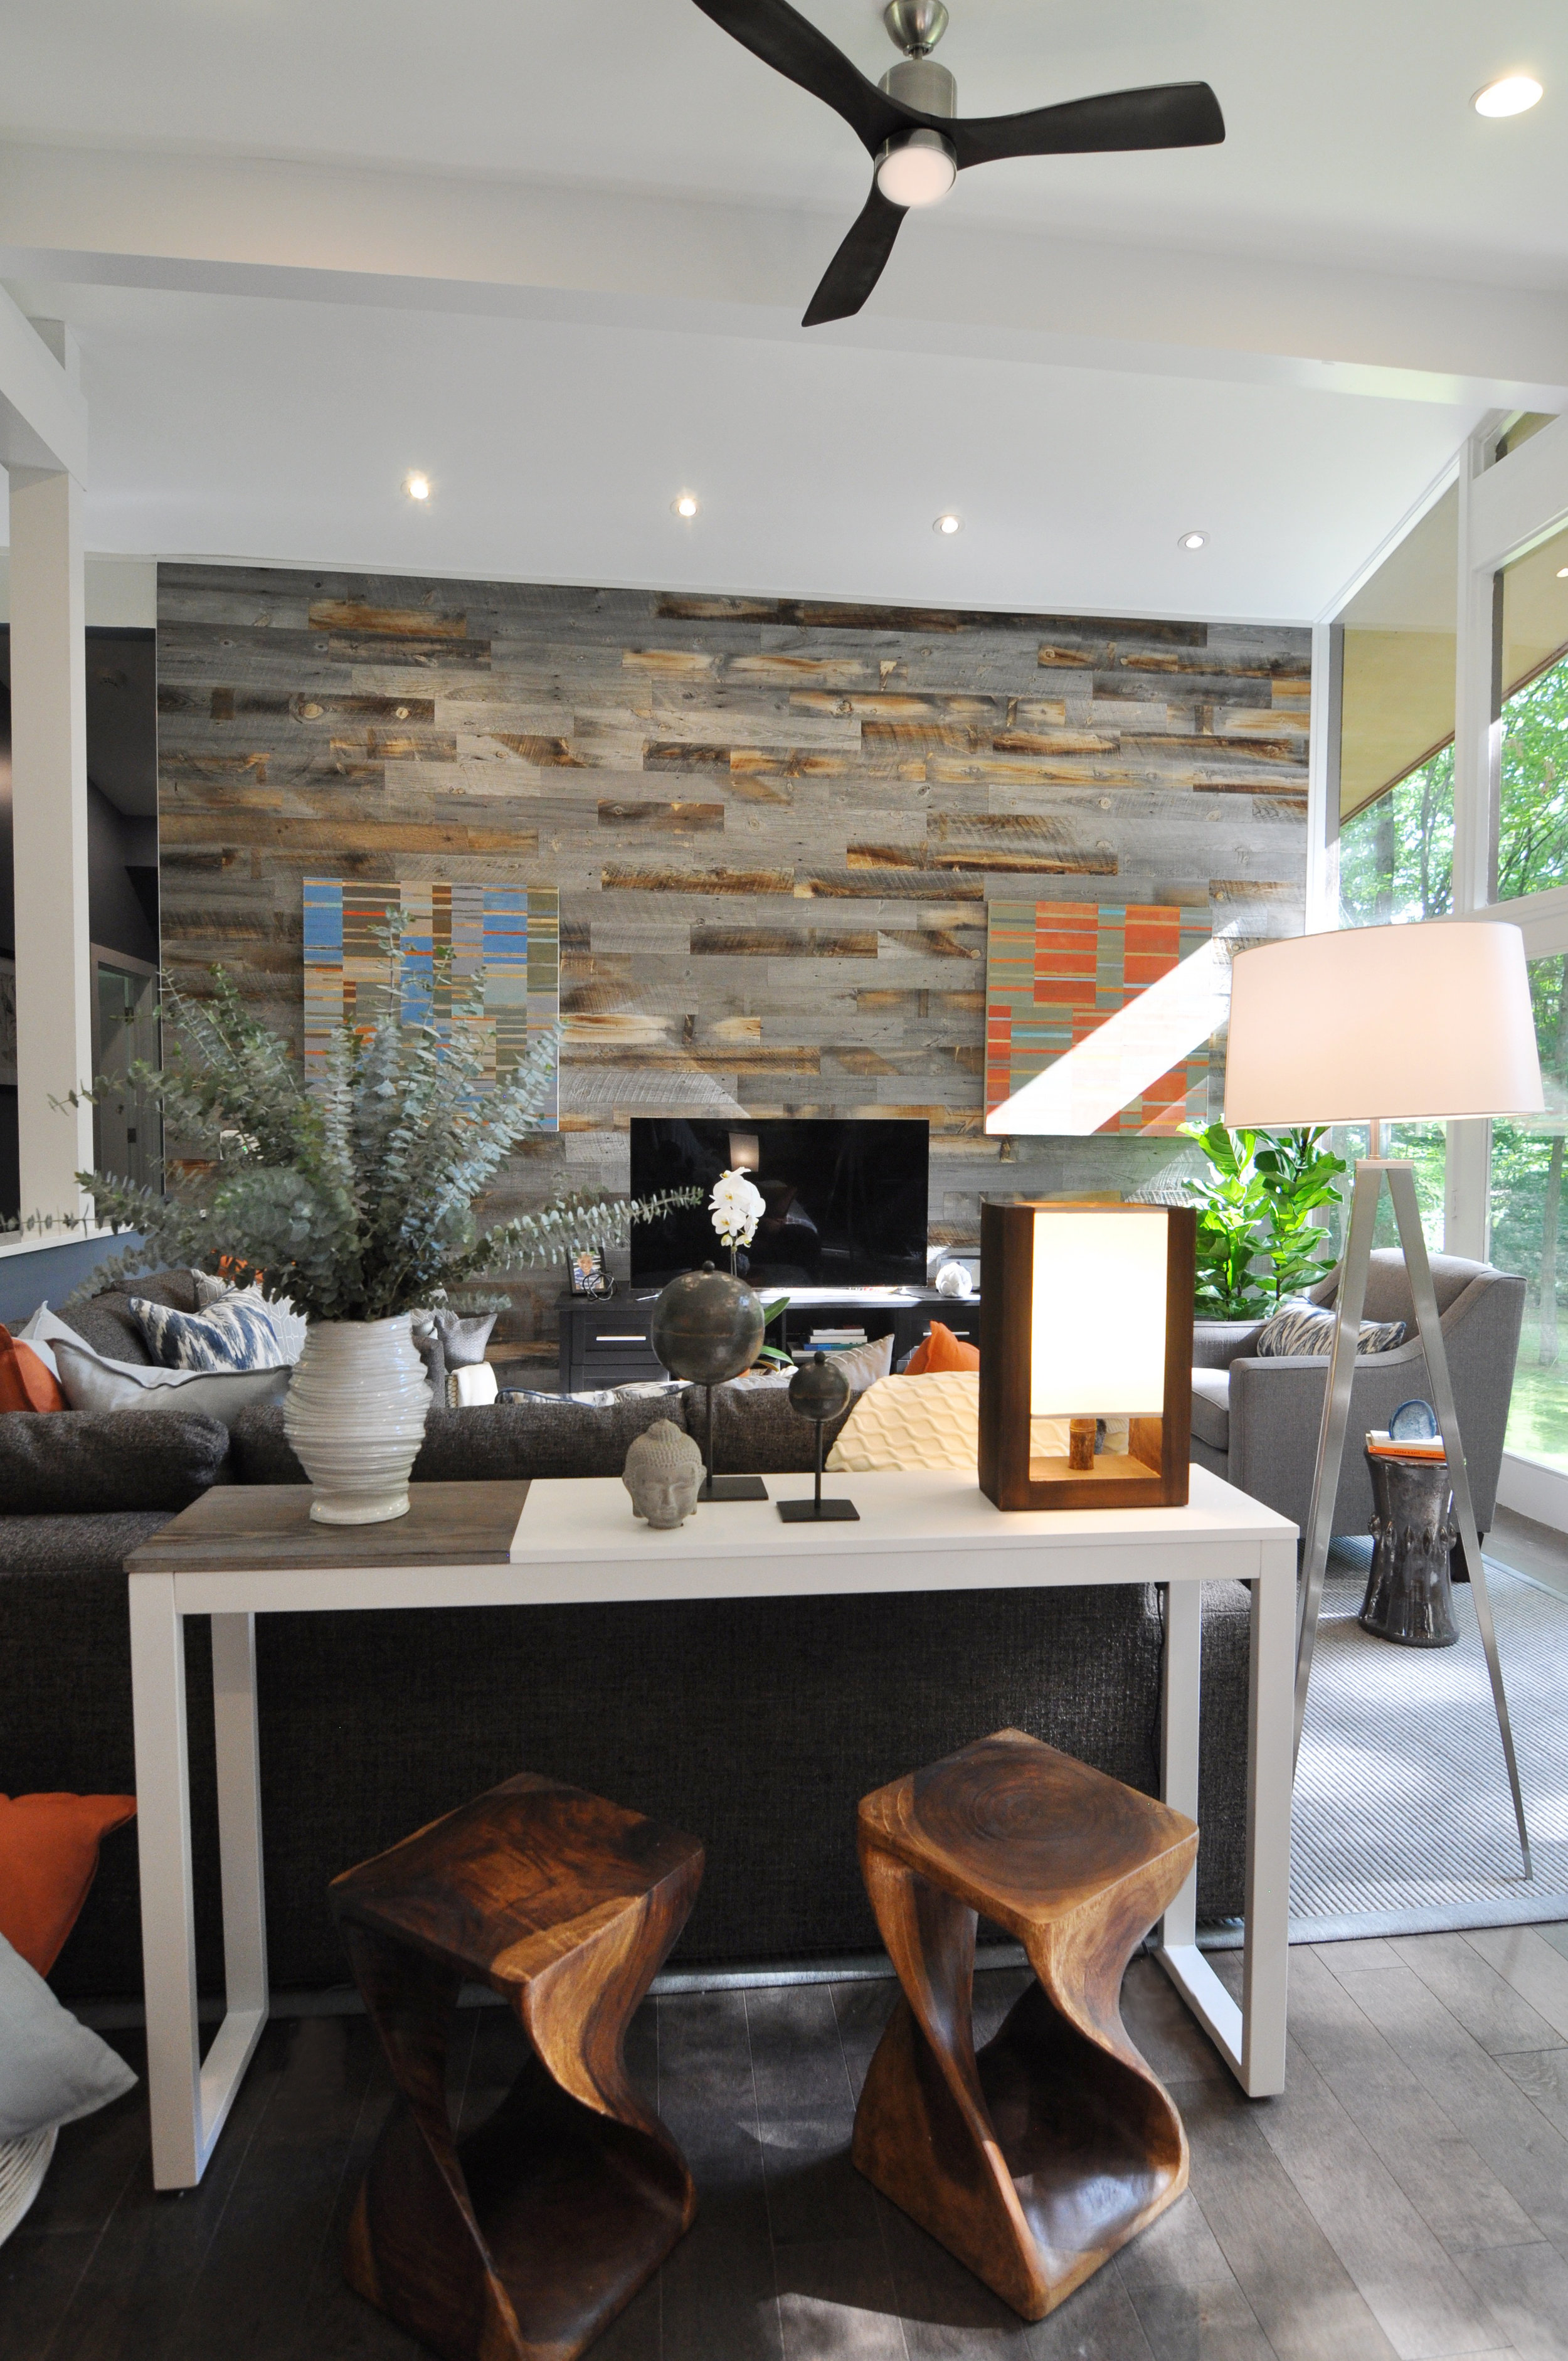 Kim A Mitchell_Design Lead_HGTV_The Property Brothers_Season 6_Episode 9_View from Family Room_Living Room_Reclaimed Wood Wall_2017_Soft Modern.jpg